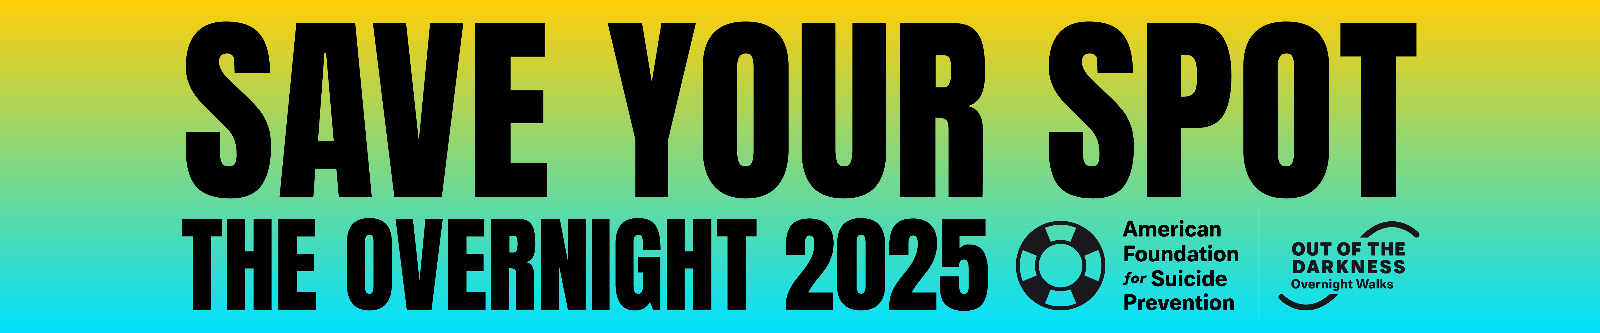 Save Your Spot for 2025!